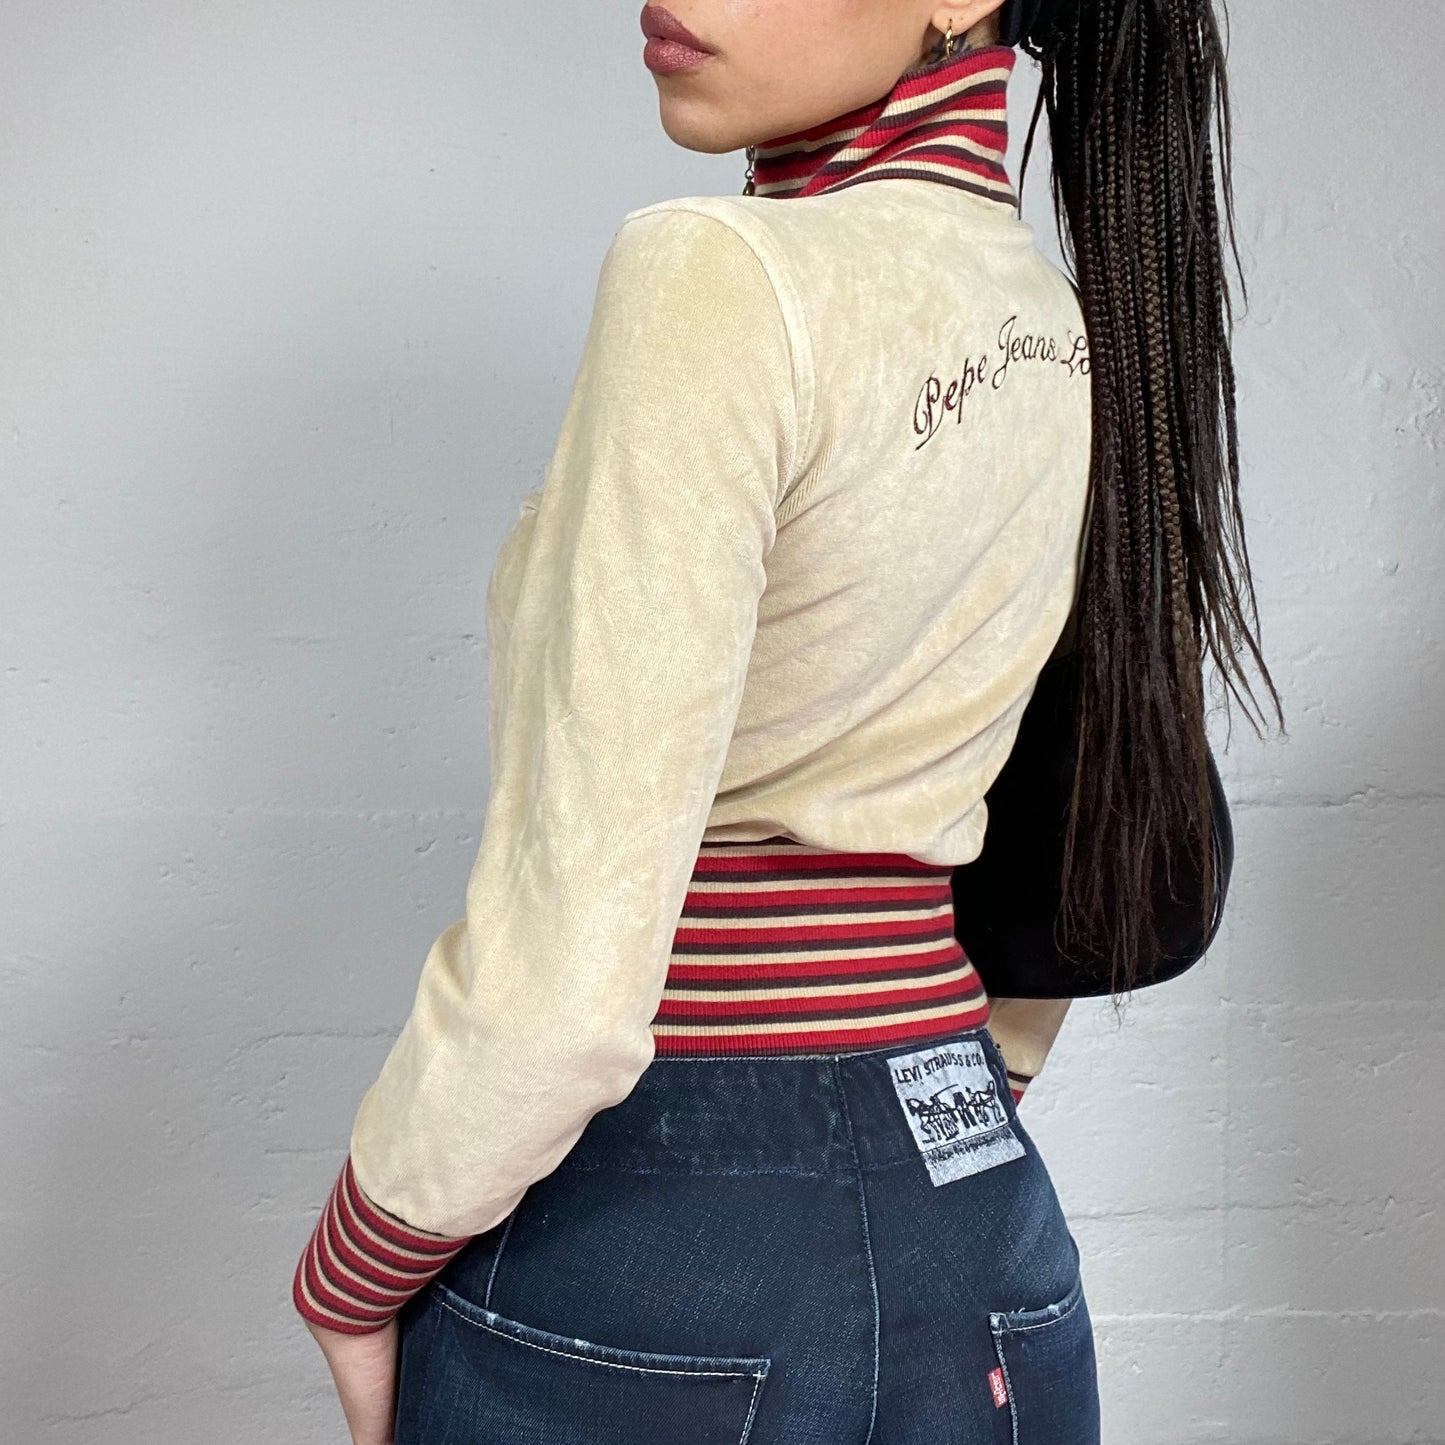 Vintage 2000's Pepe Jeans Sporty Beige Corduroy Zip Up Sweater with Red Stripes Print and Brand Lettering Embroidery Detail (S)